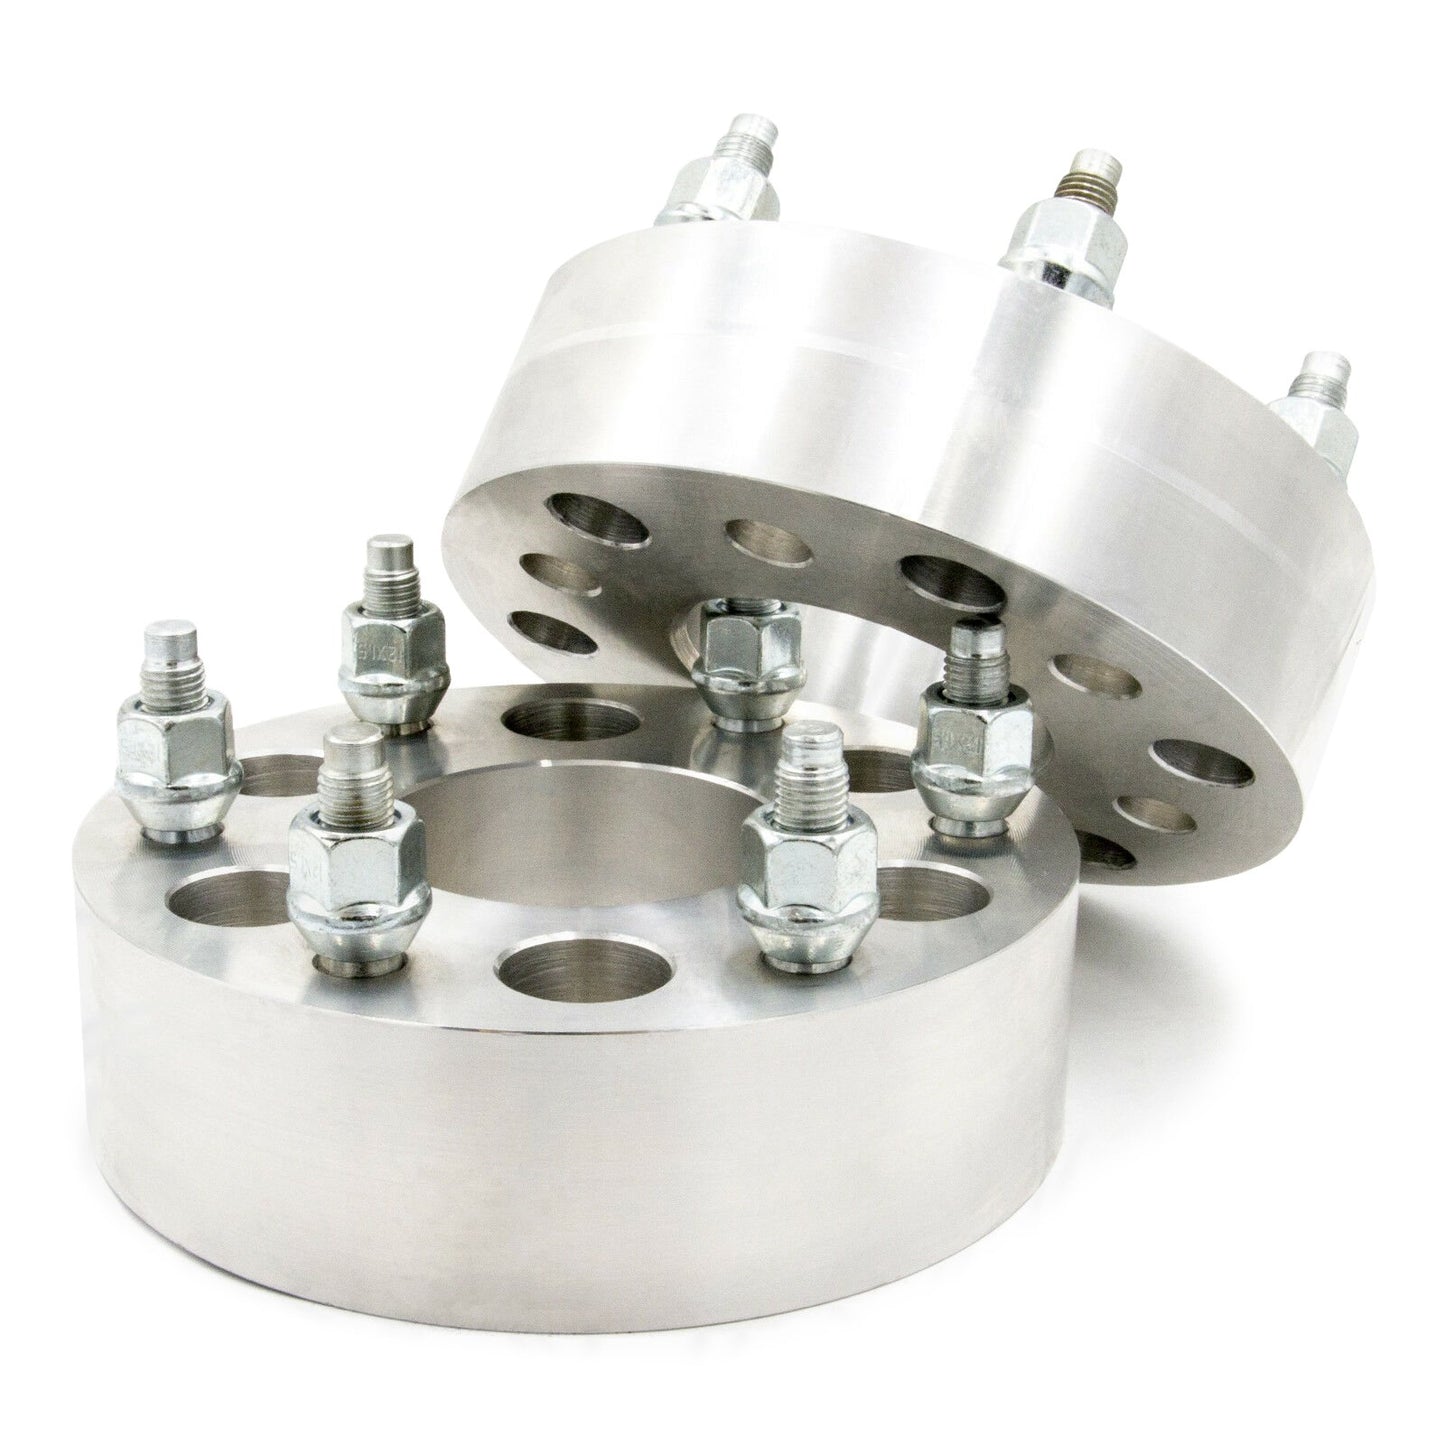 6x132 Wheel Spacers For Chevy, GMC, Saturn, Buick w/ 14x1.5 Studs & Lug Nuts 74.5mm Center Bore - Thickness: 3/4" - 4" in